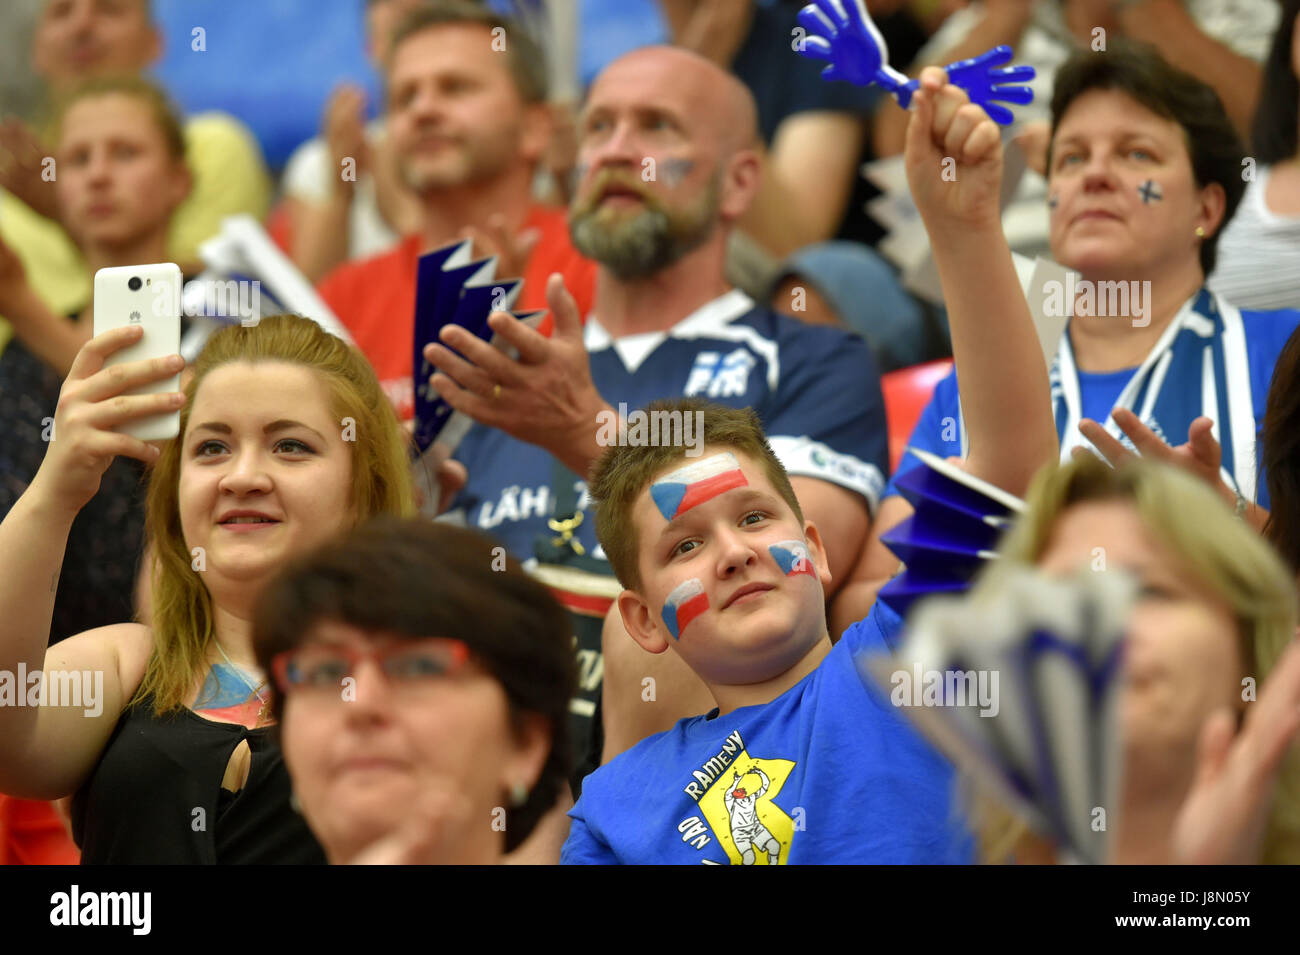 Czech fans during the volleyball World Cup Qualification match Czech Republic vs Cyprus in Karlovy Vary, Czech Republic, May 27, 2017. (CTK Photo/Slavomir Kubes) Stock Photo